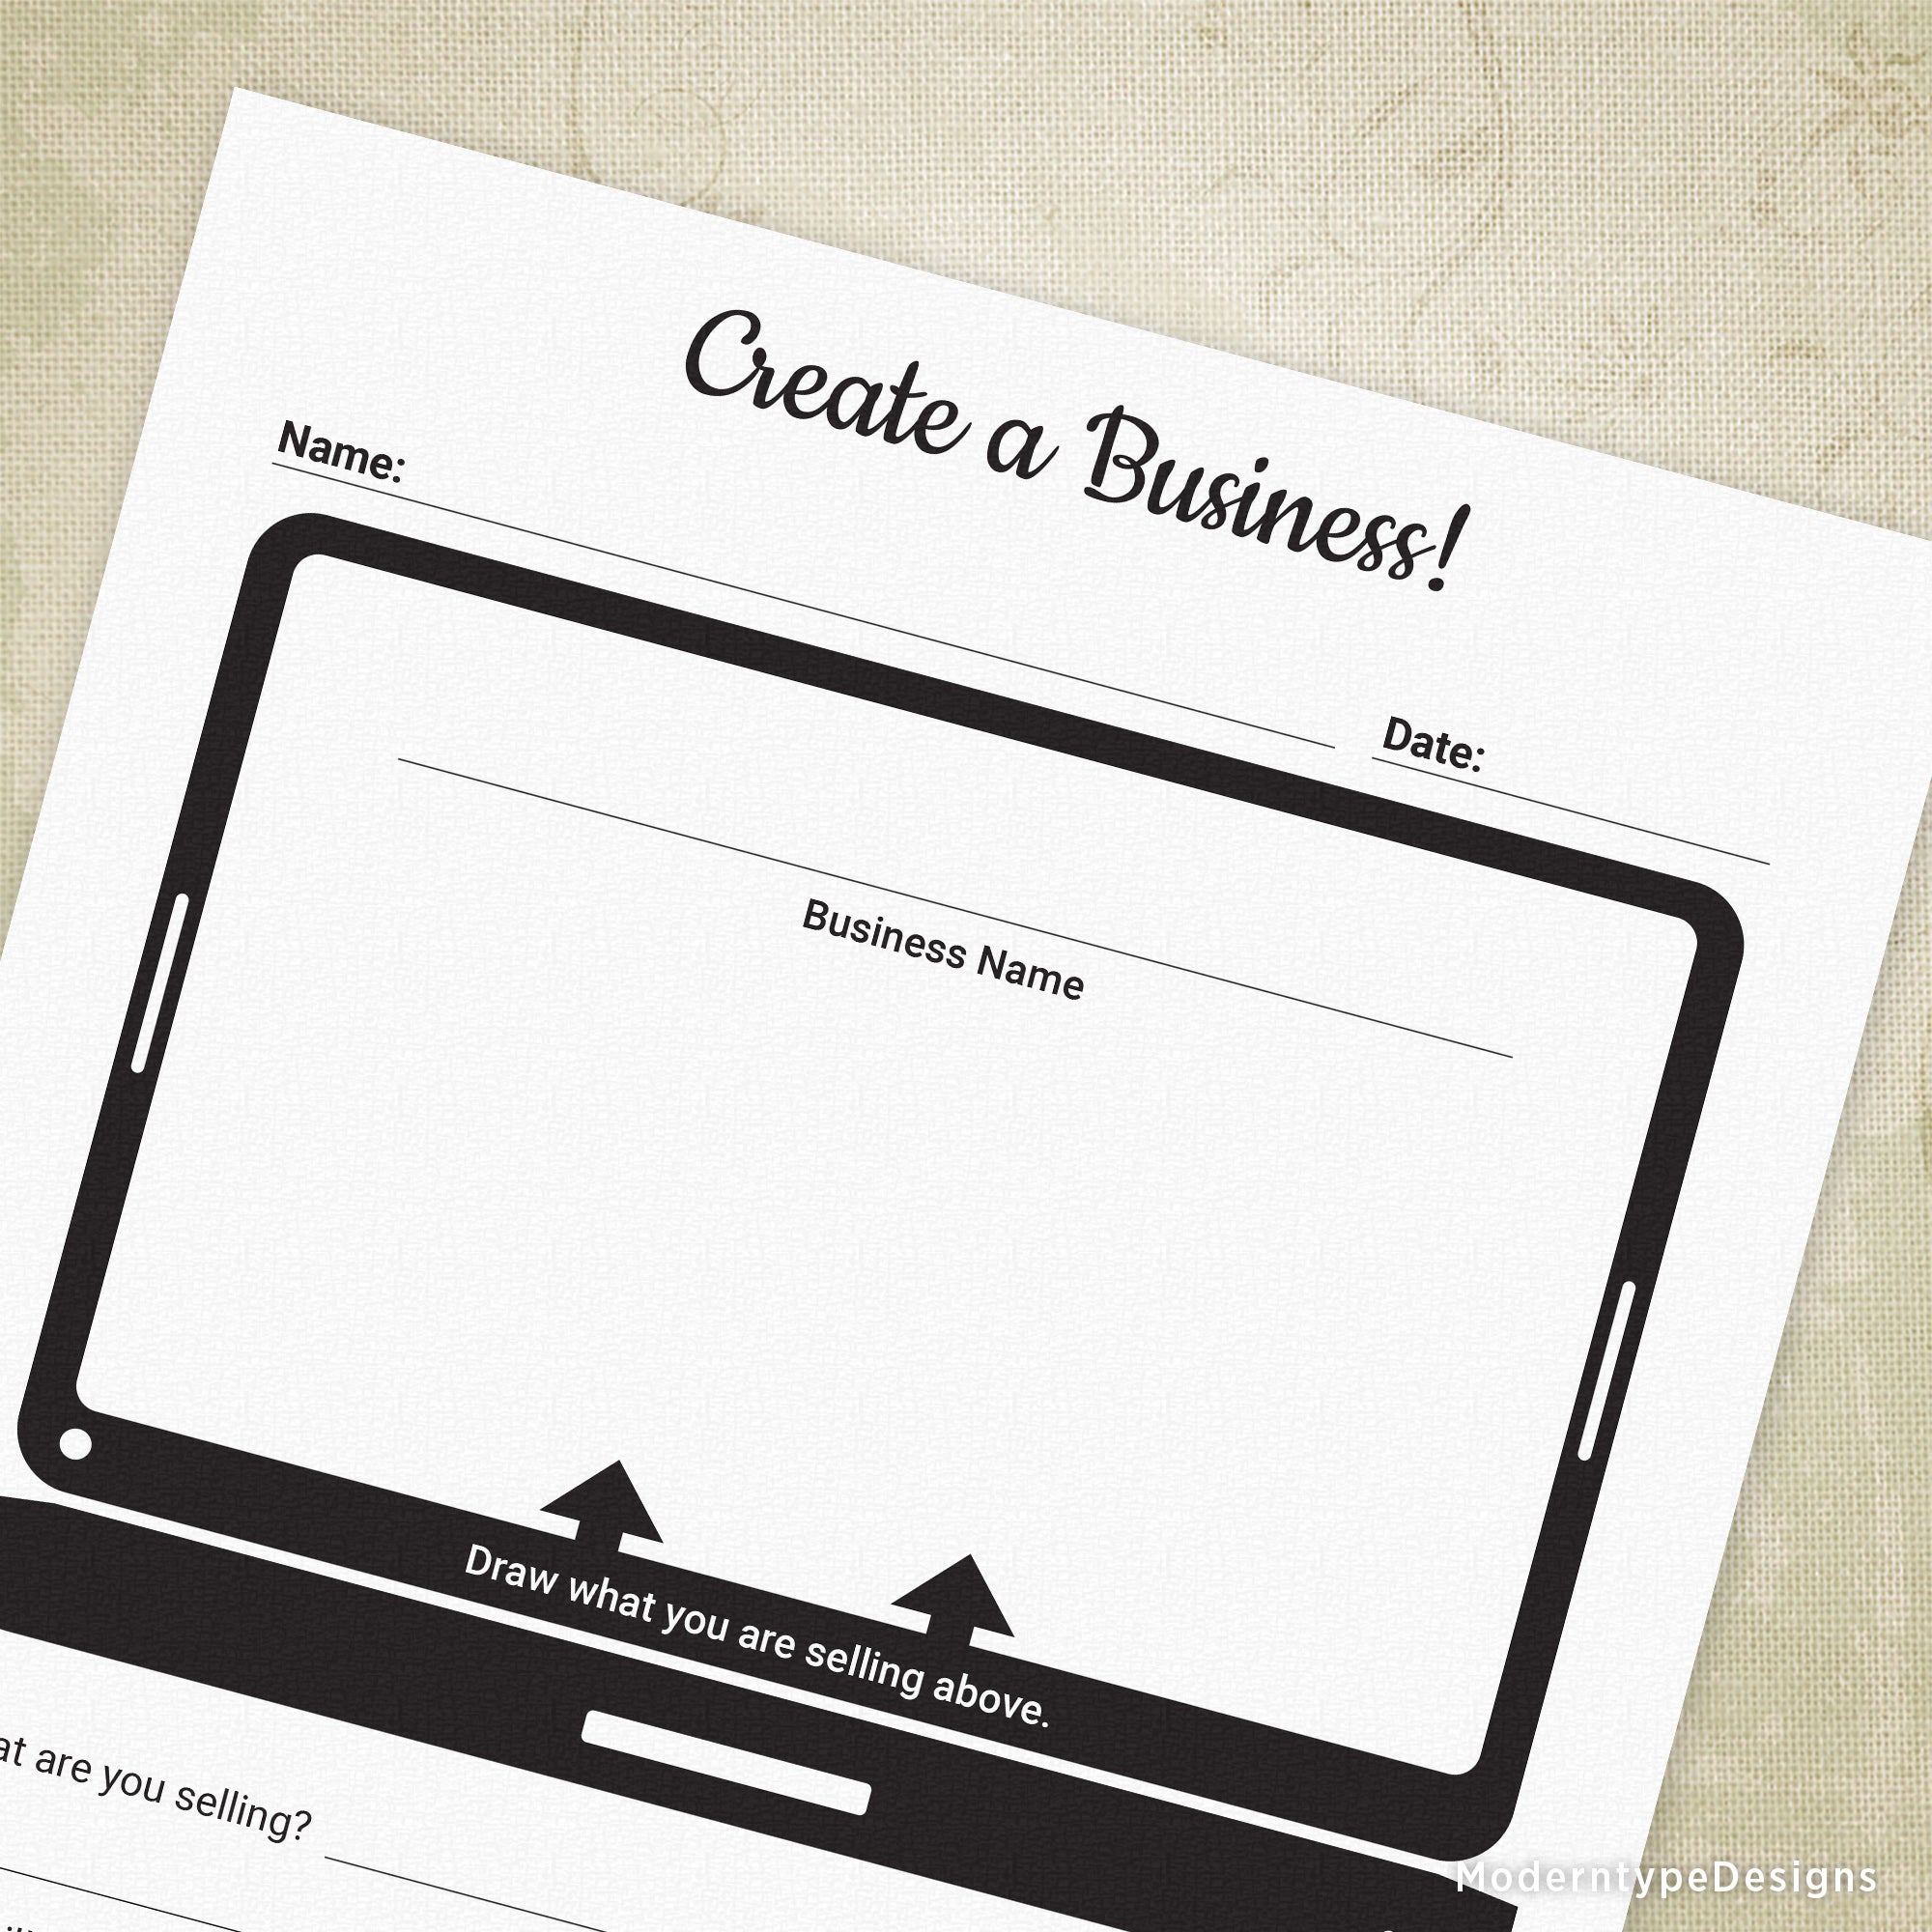 Create a Business Printable Planner for Kids